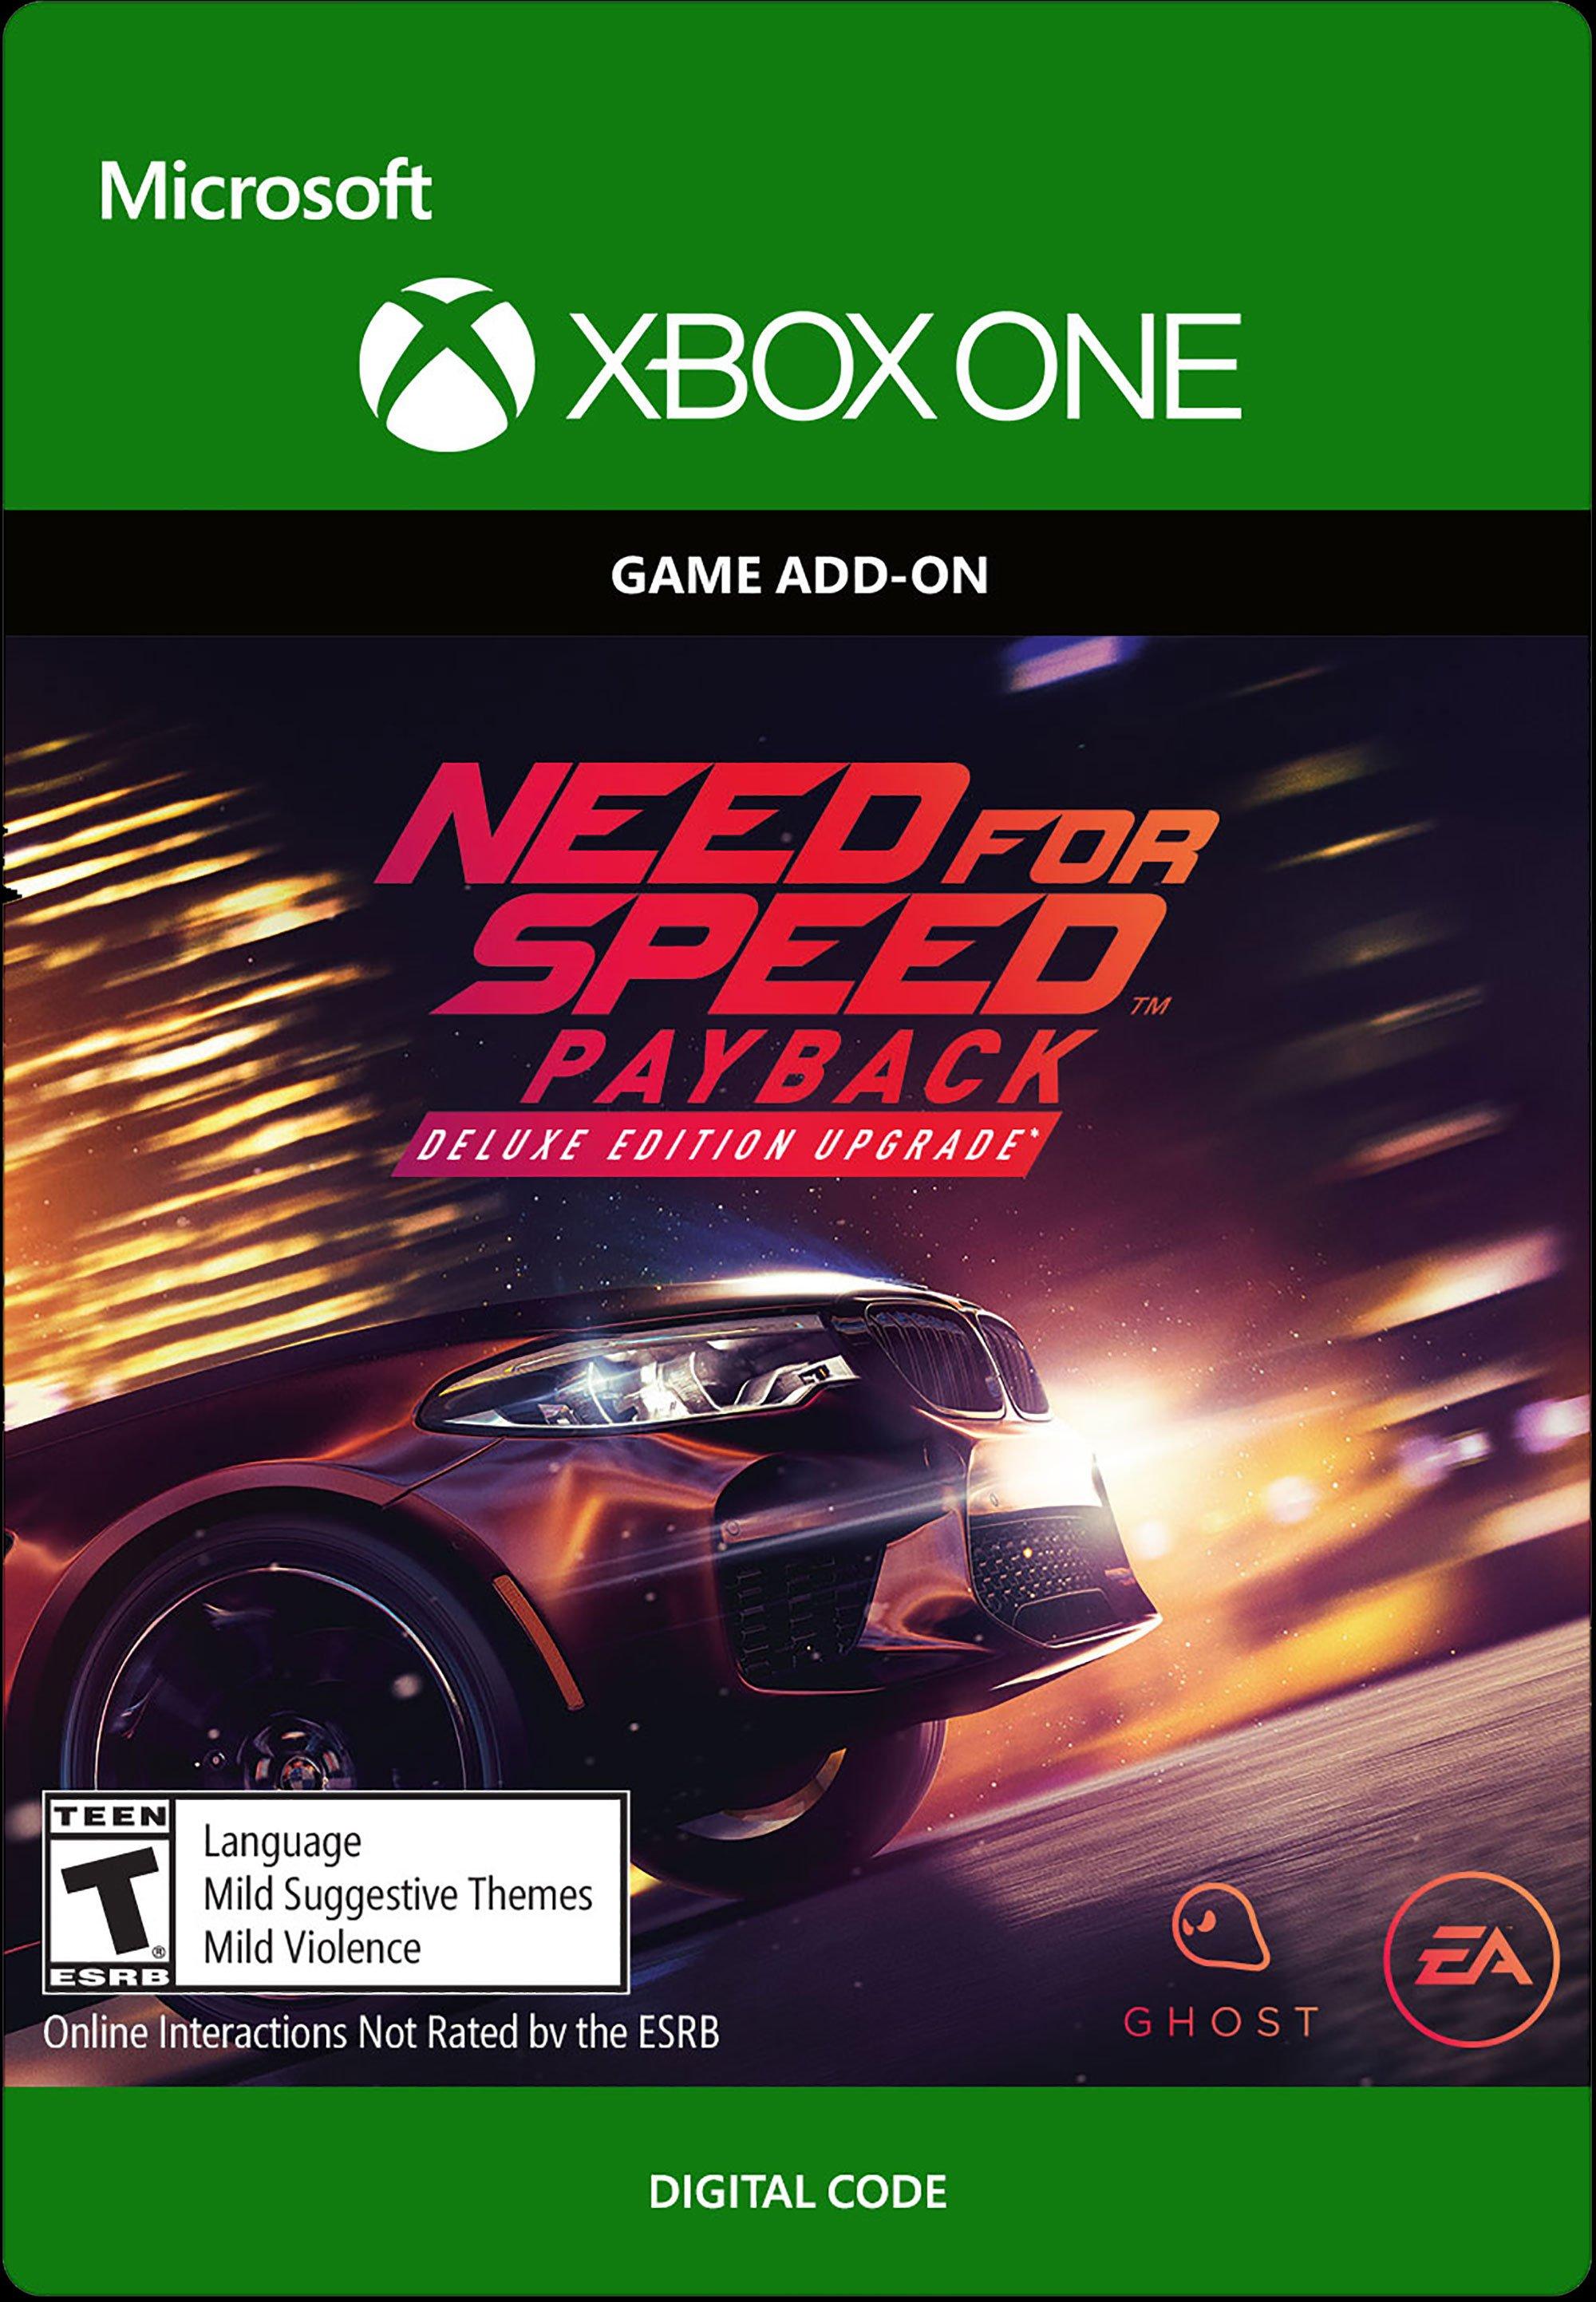 need for speed payback xbox 360